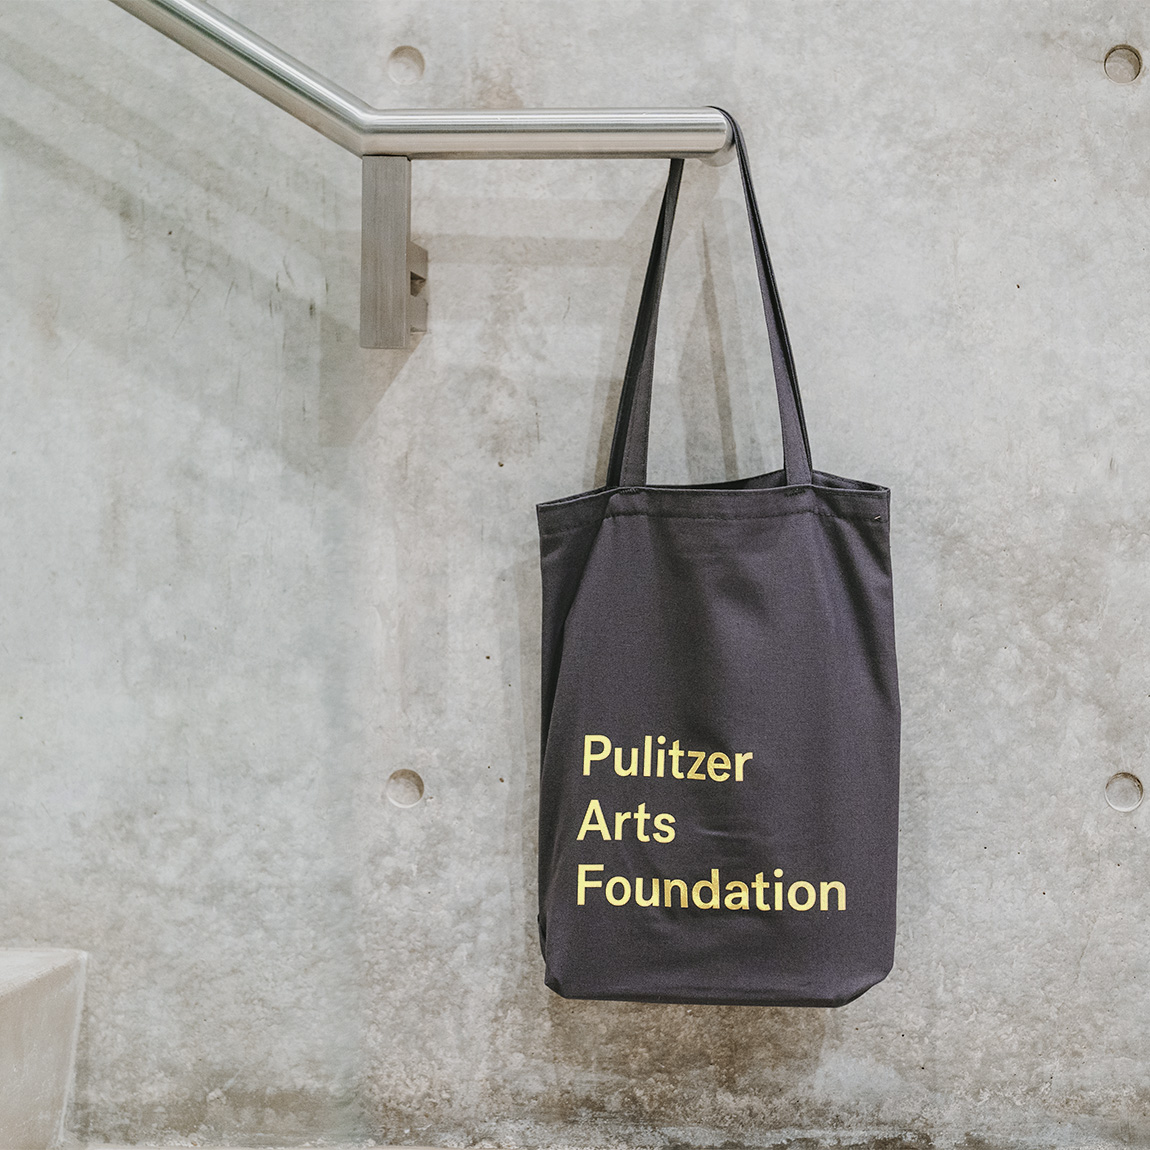 A grey tote bag hanging off a metal hand railing in front of a concrete wall